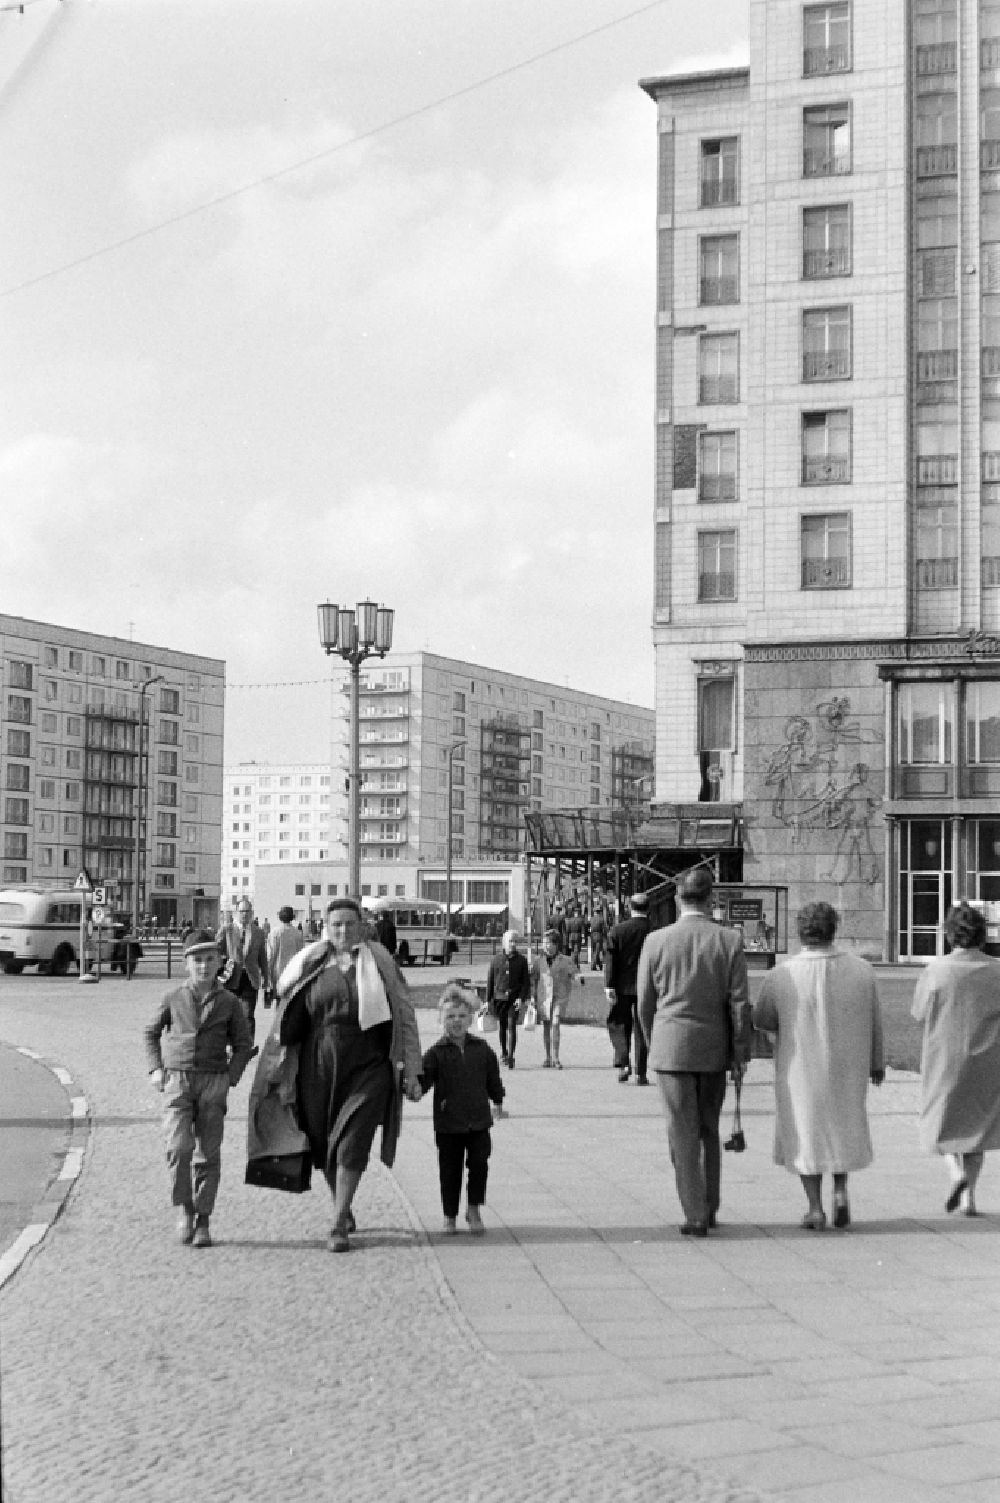 GDR photo archive: Berlin - Pedestrians and passers-by in traffic with children on place Strausberger Platz in the district Friedrichshain in Berlin Eastberlin on the territory of the former GDR, German Democratic Republic